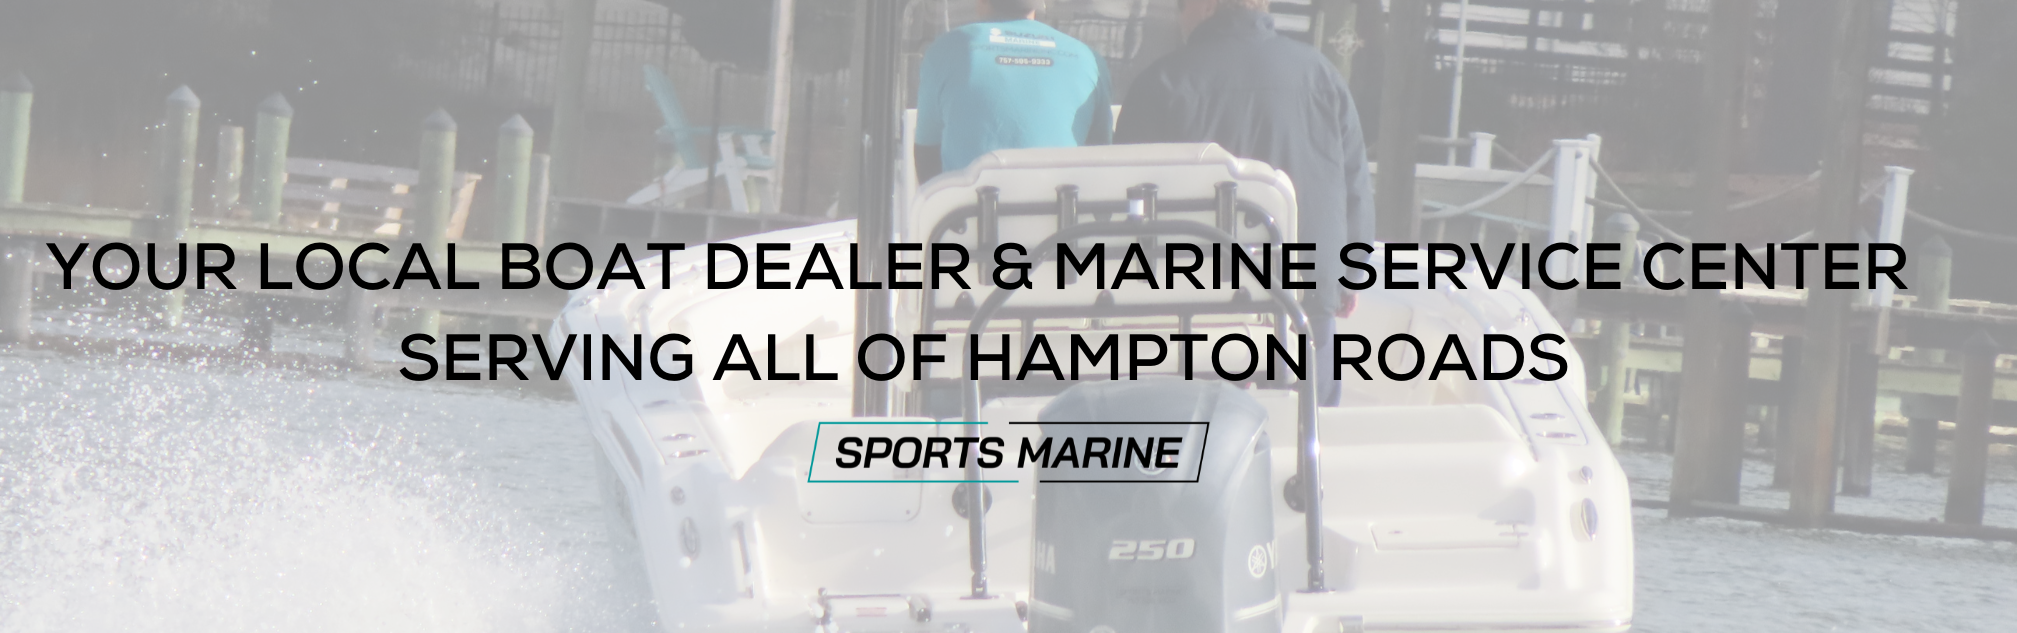 new and used boat dealer and service center in hampton roads va